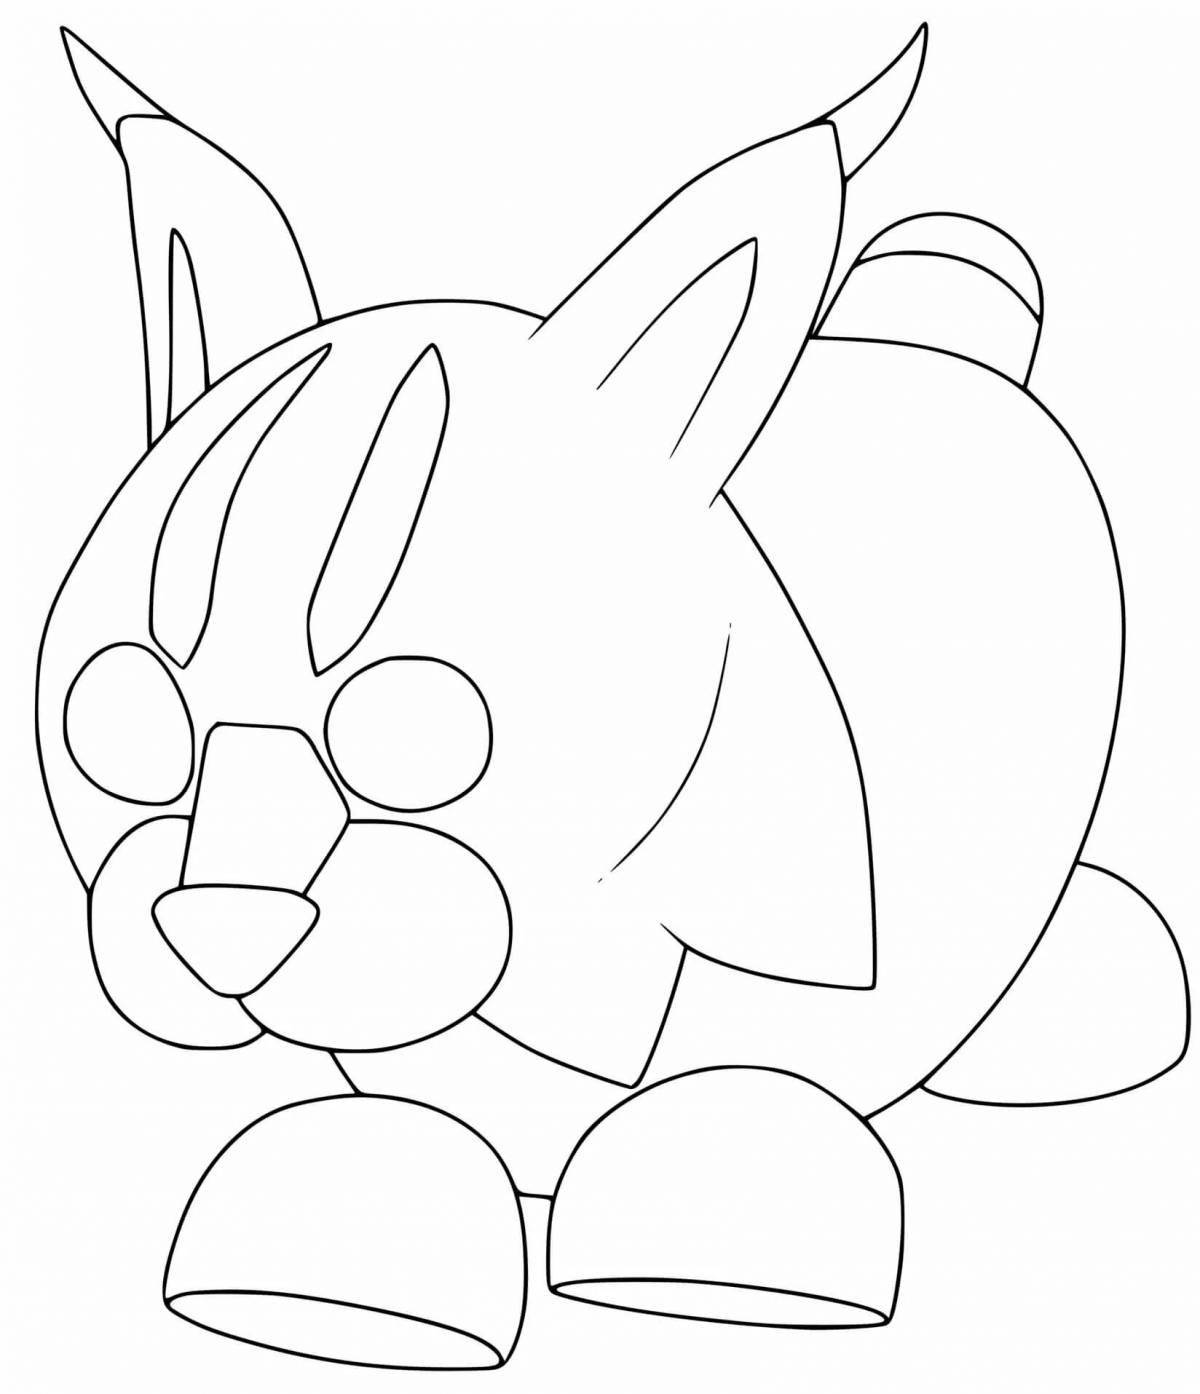 Intriguing adopt me roblox coloring page